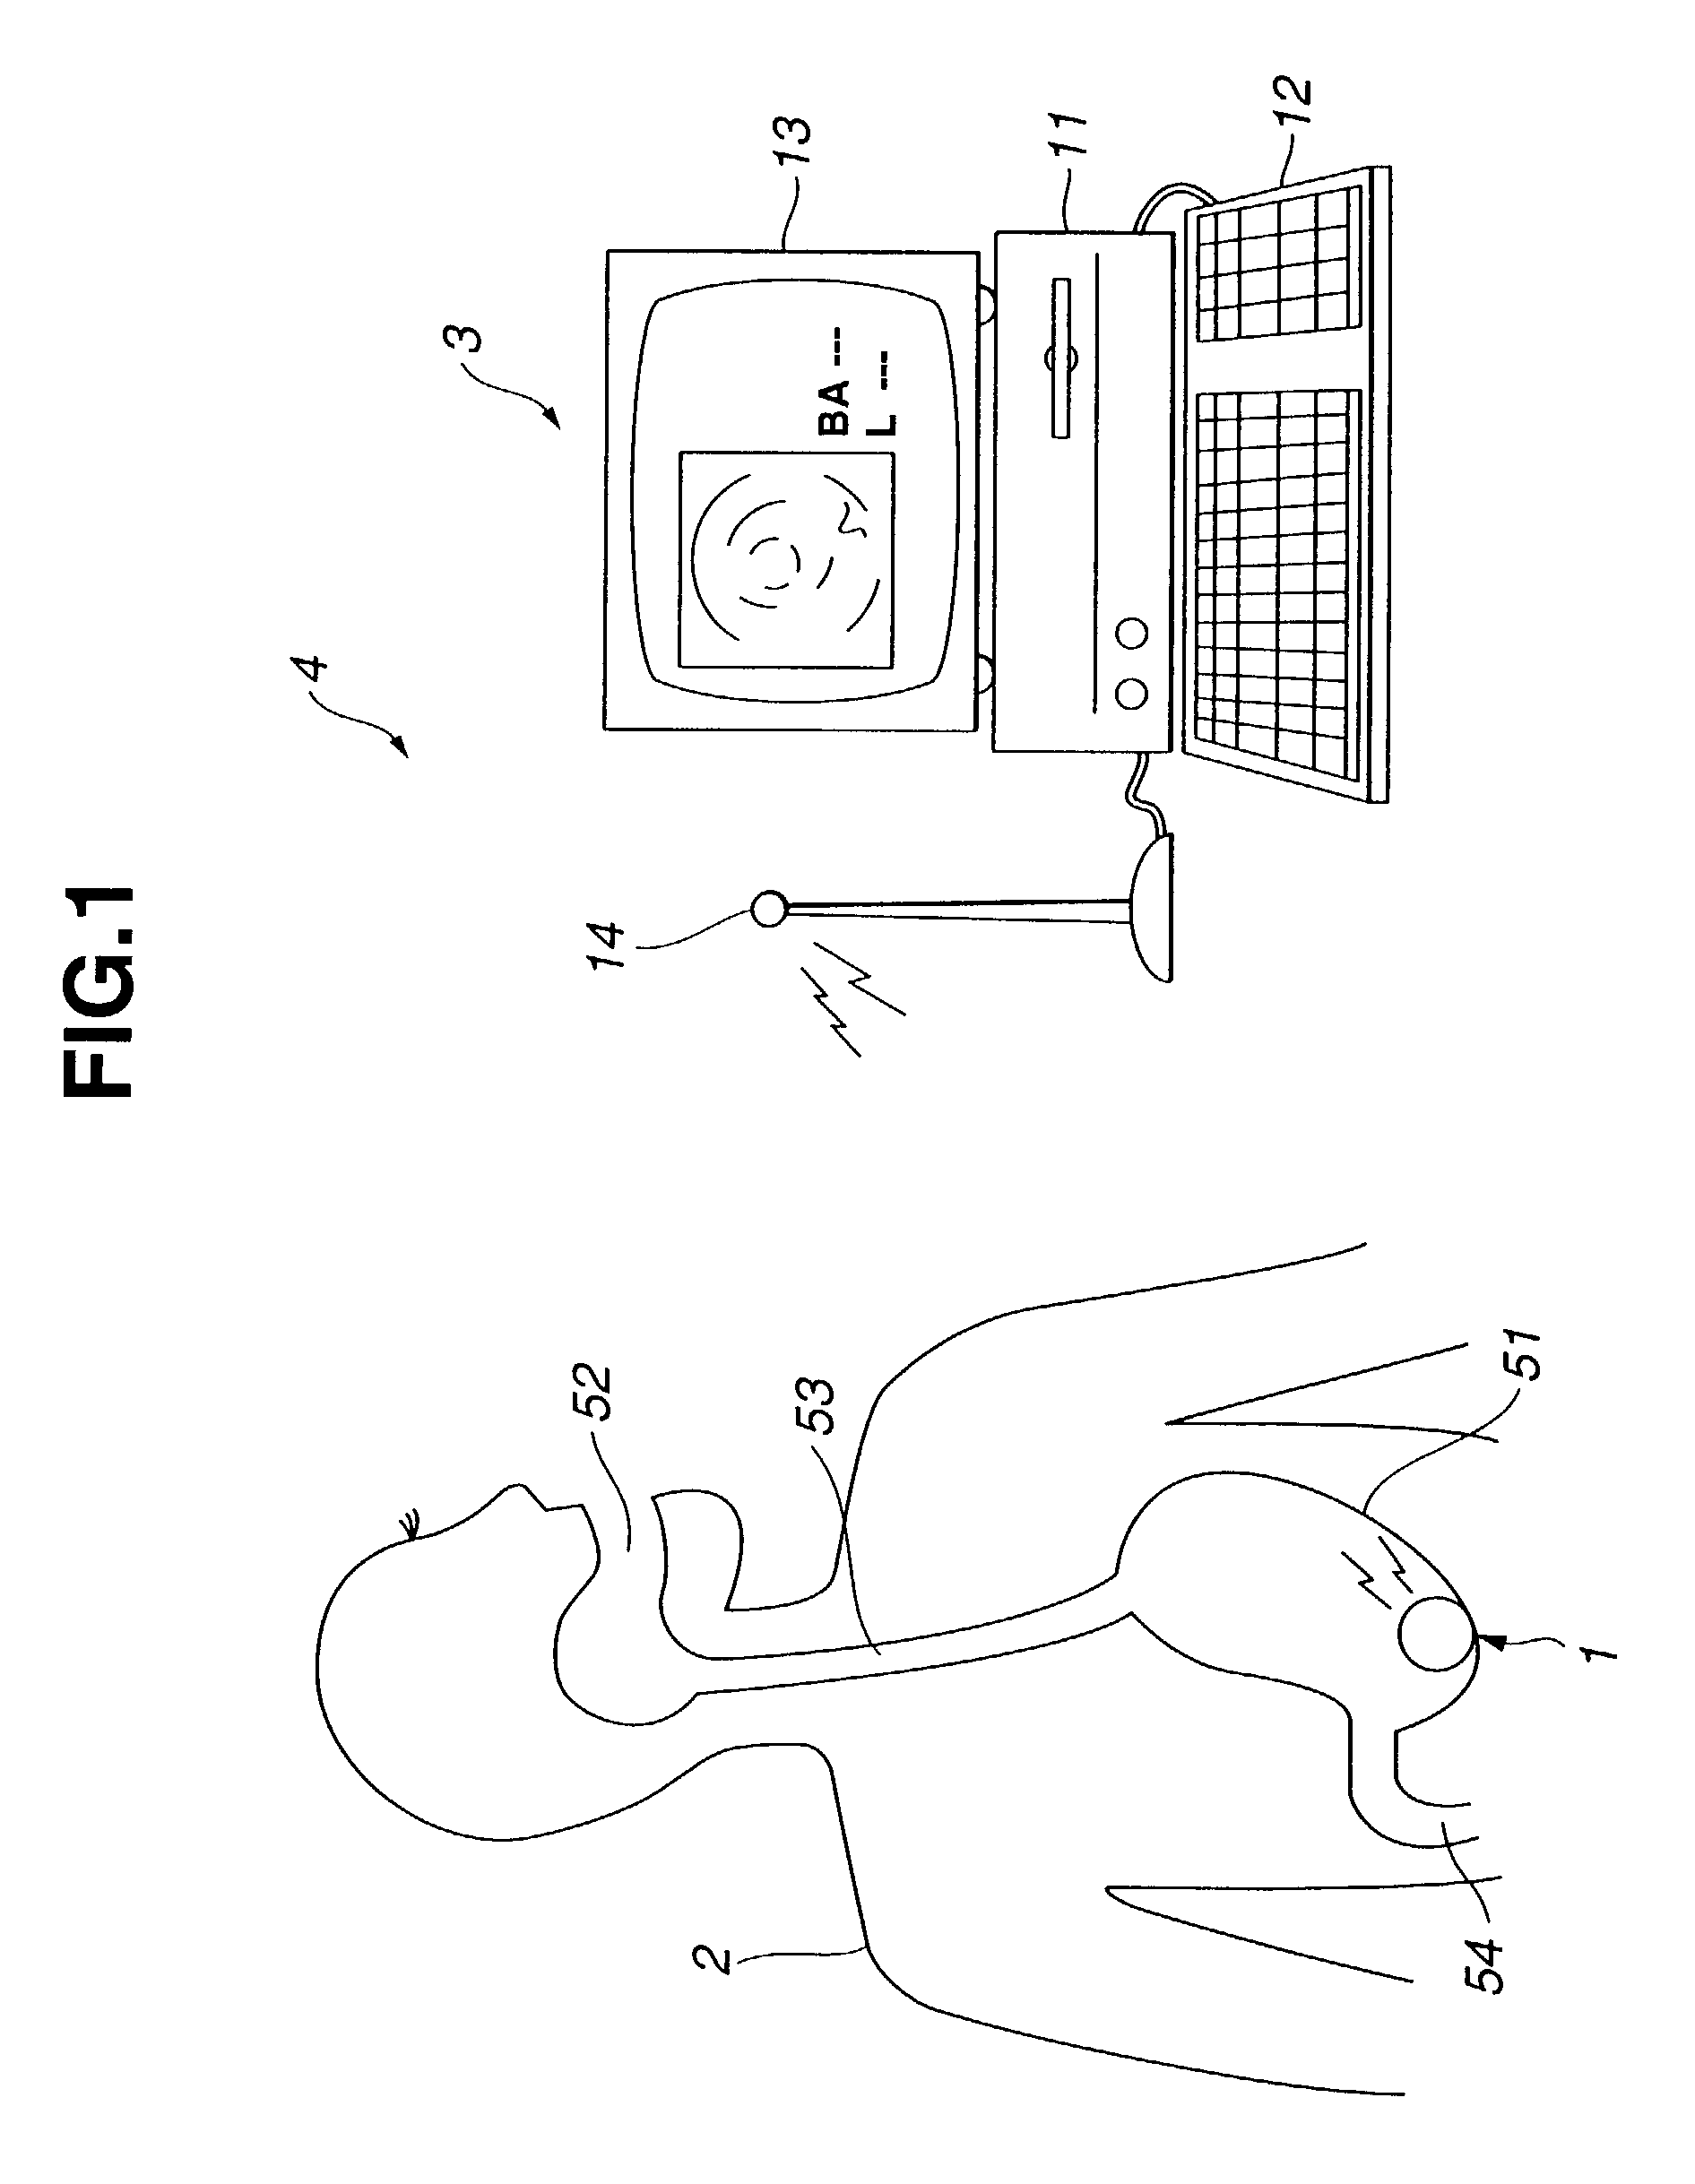 Encapsulated medical device and method of examining, curing, and treating internal region of body cavity using encapsulated medical device